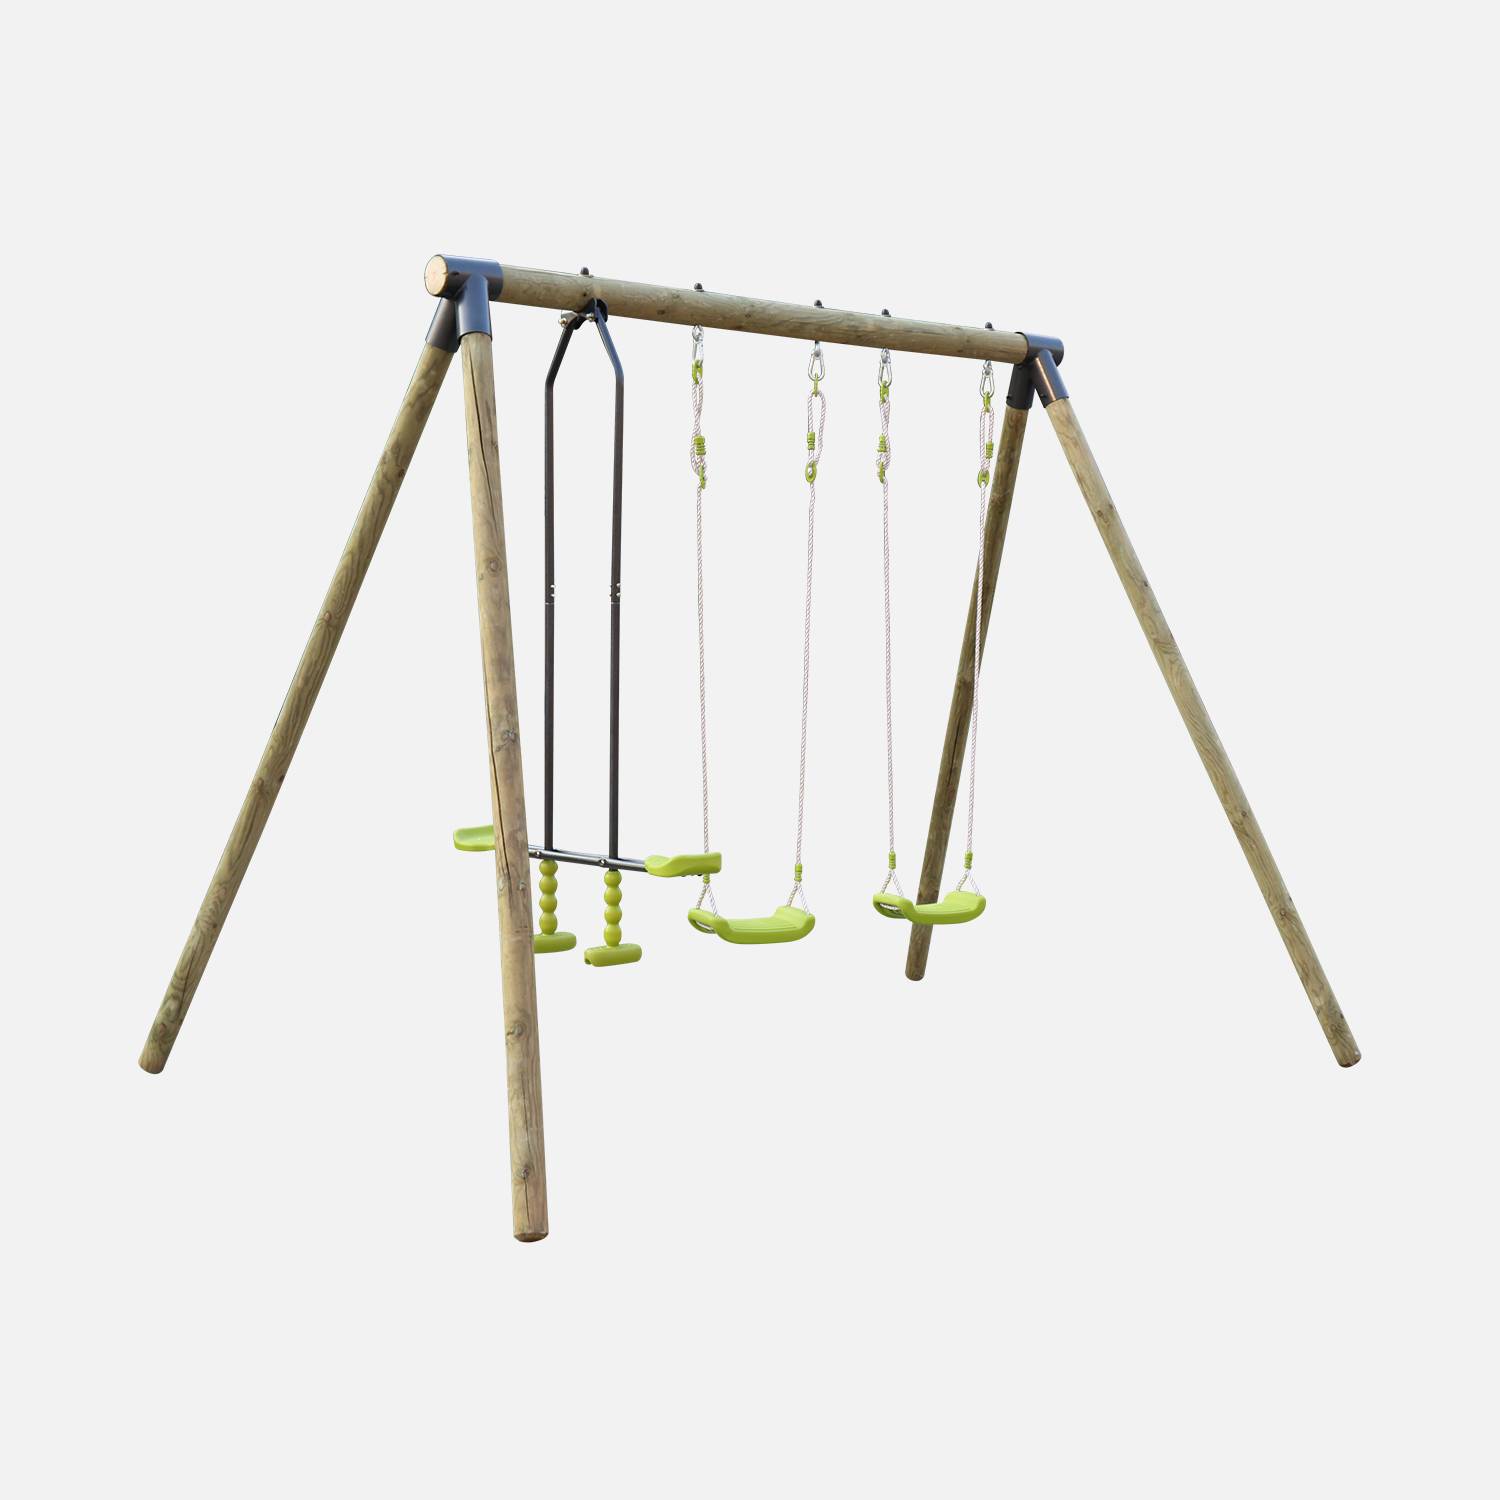 Wooden swing set with 2 swings and 1 double-seat glider - pressure-treated FSC pine - Naroit,sweeek,Photo1